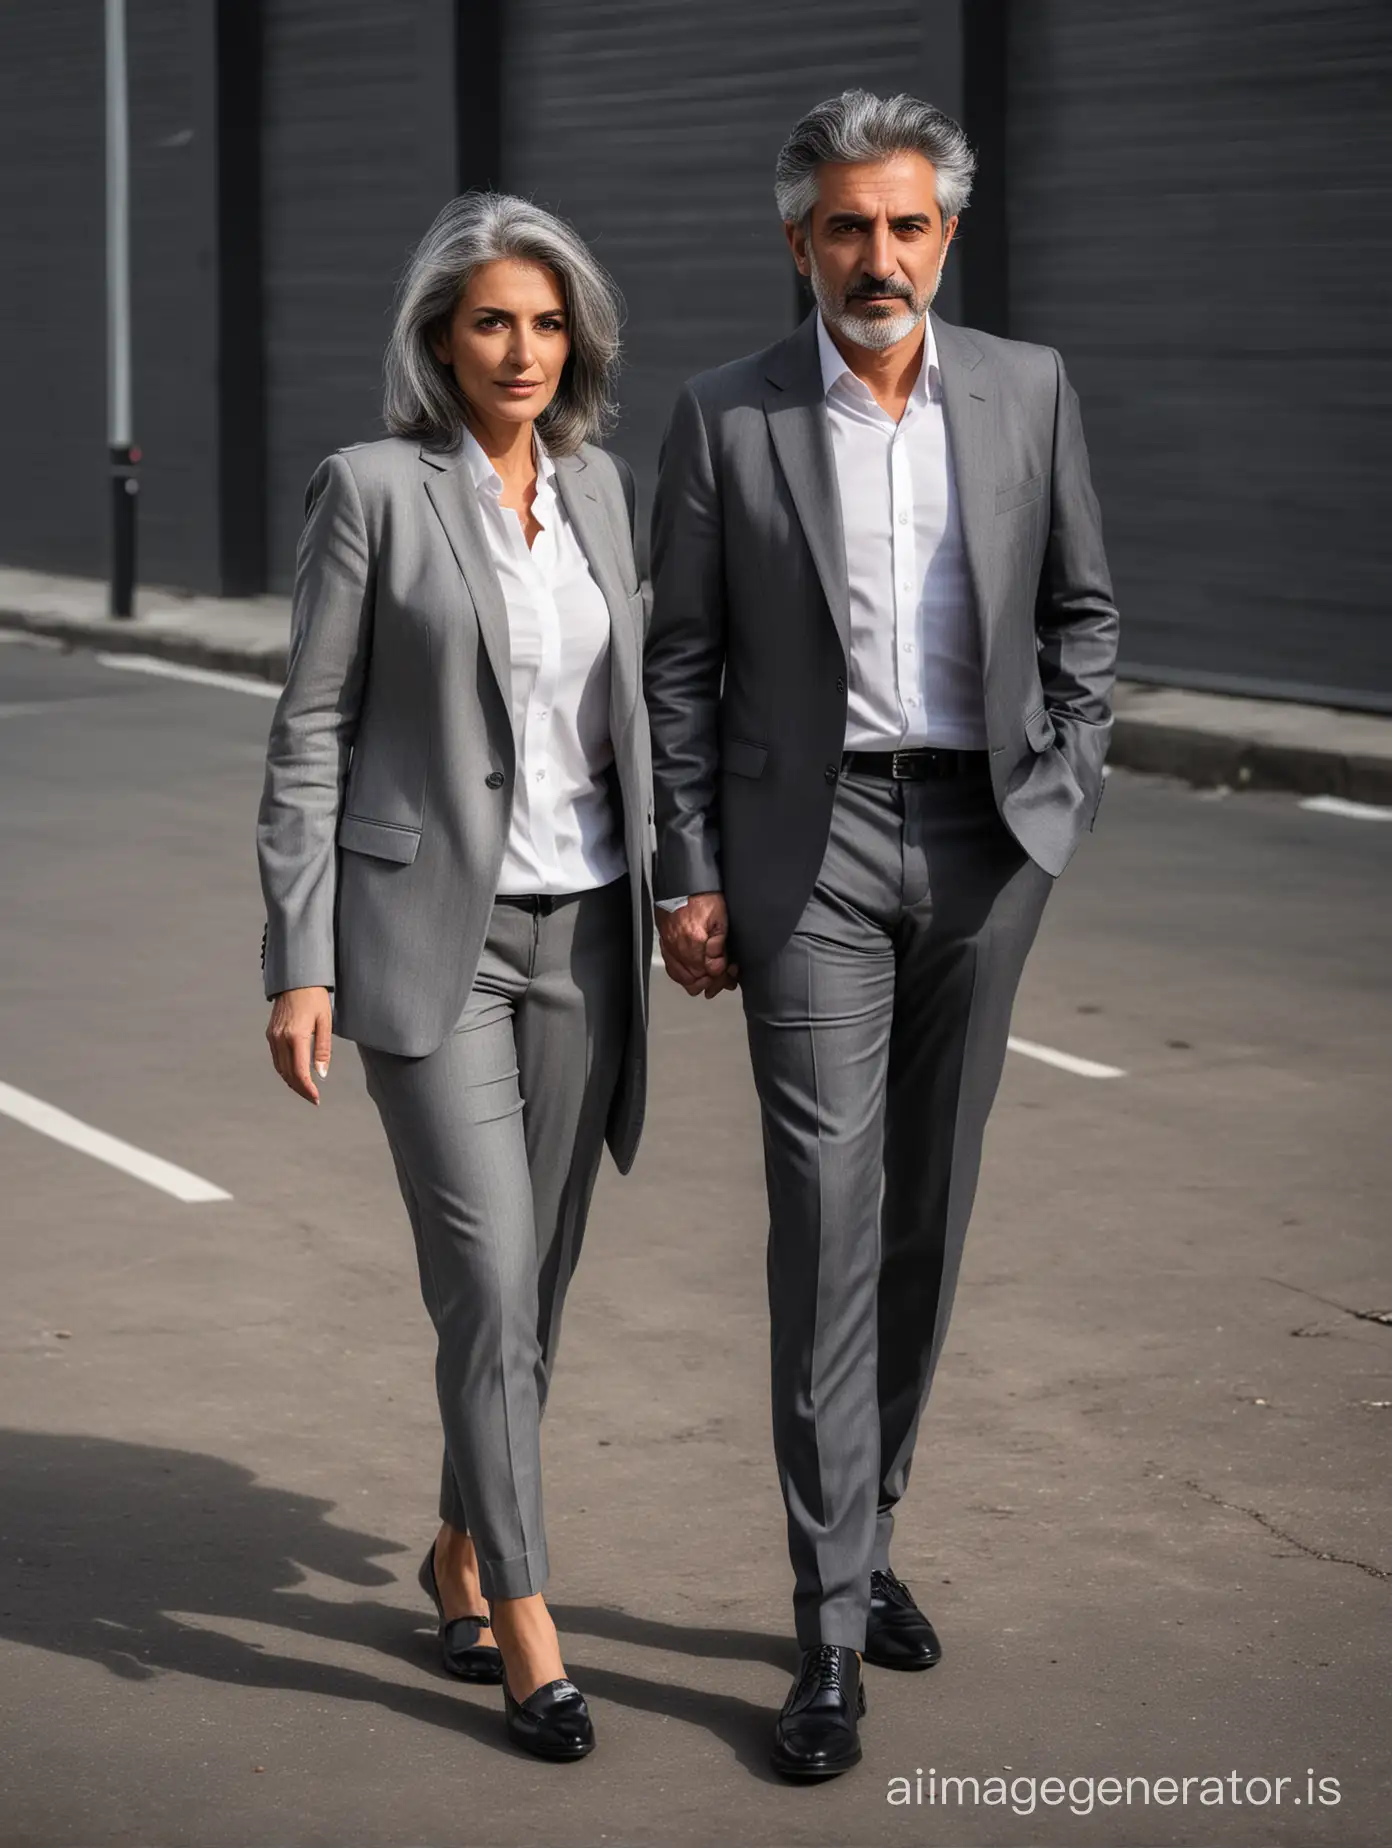 iranian short man woman 50 years old, casual style, grey suits, white shirt, black shoes, grey hair, full body shot, in a parking, dramatic lighting